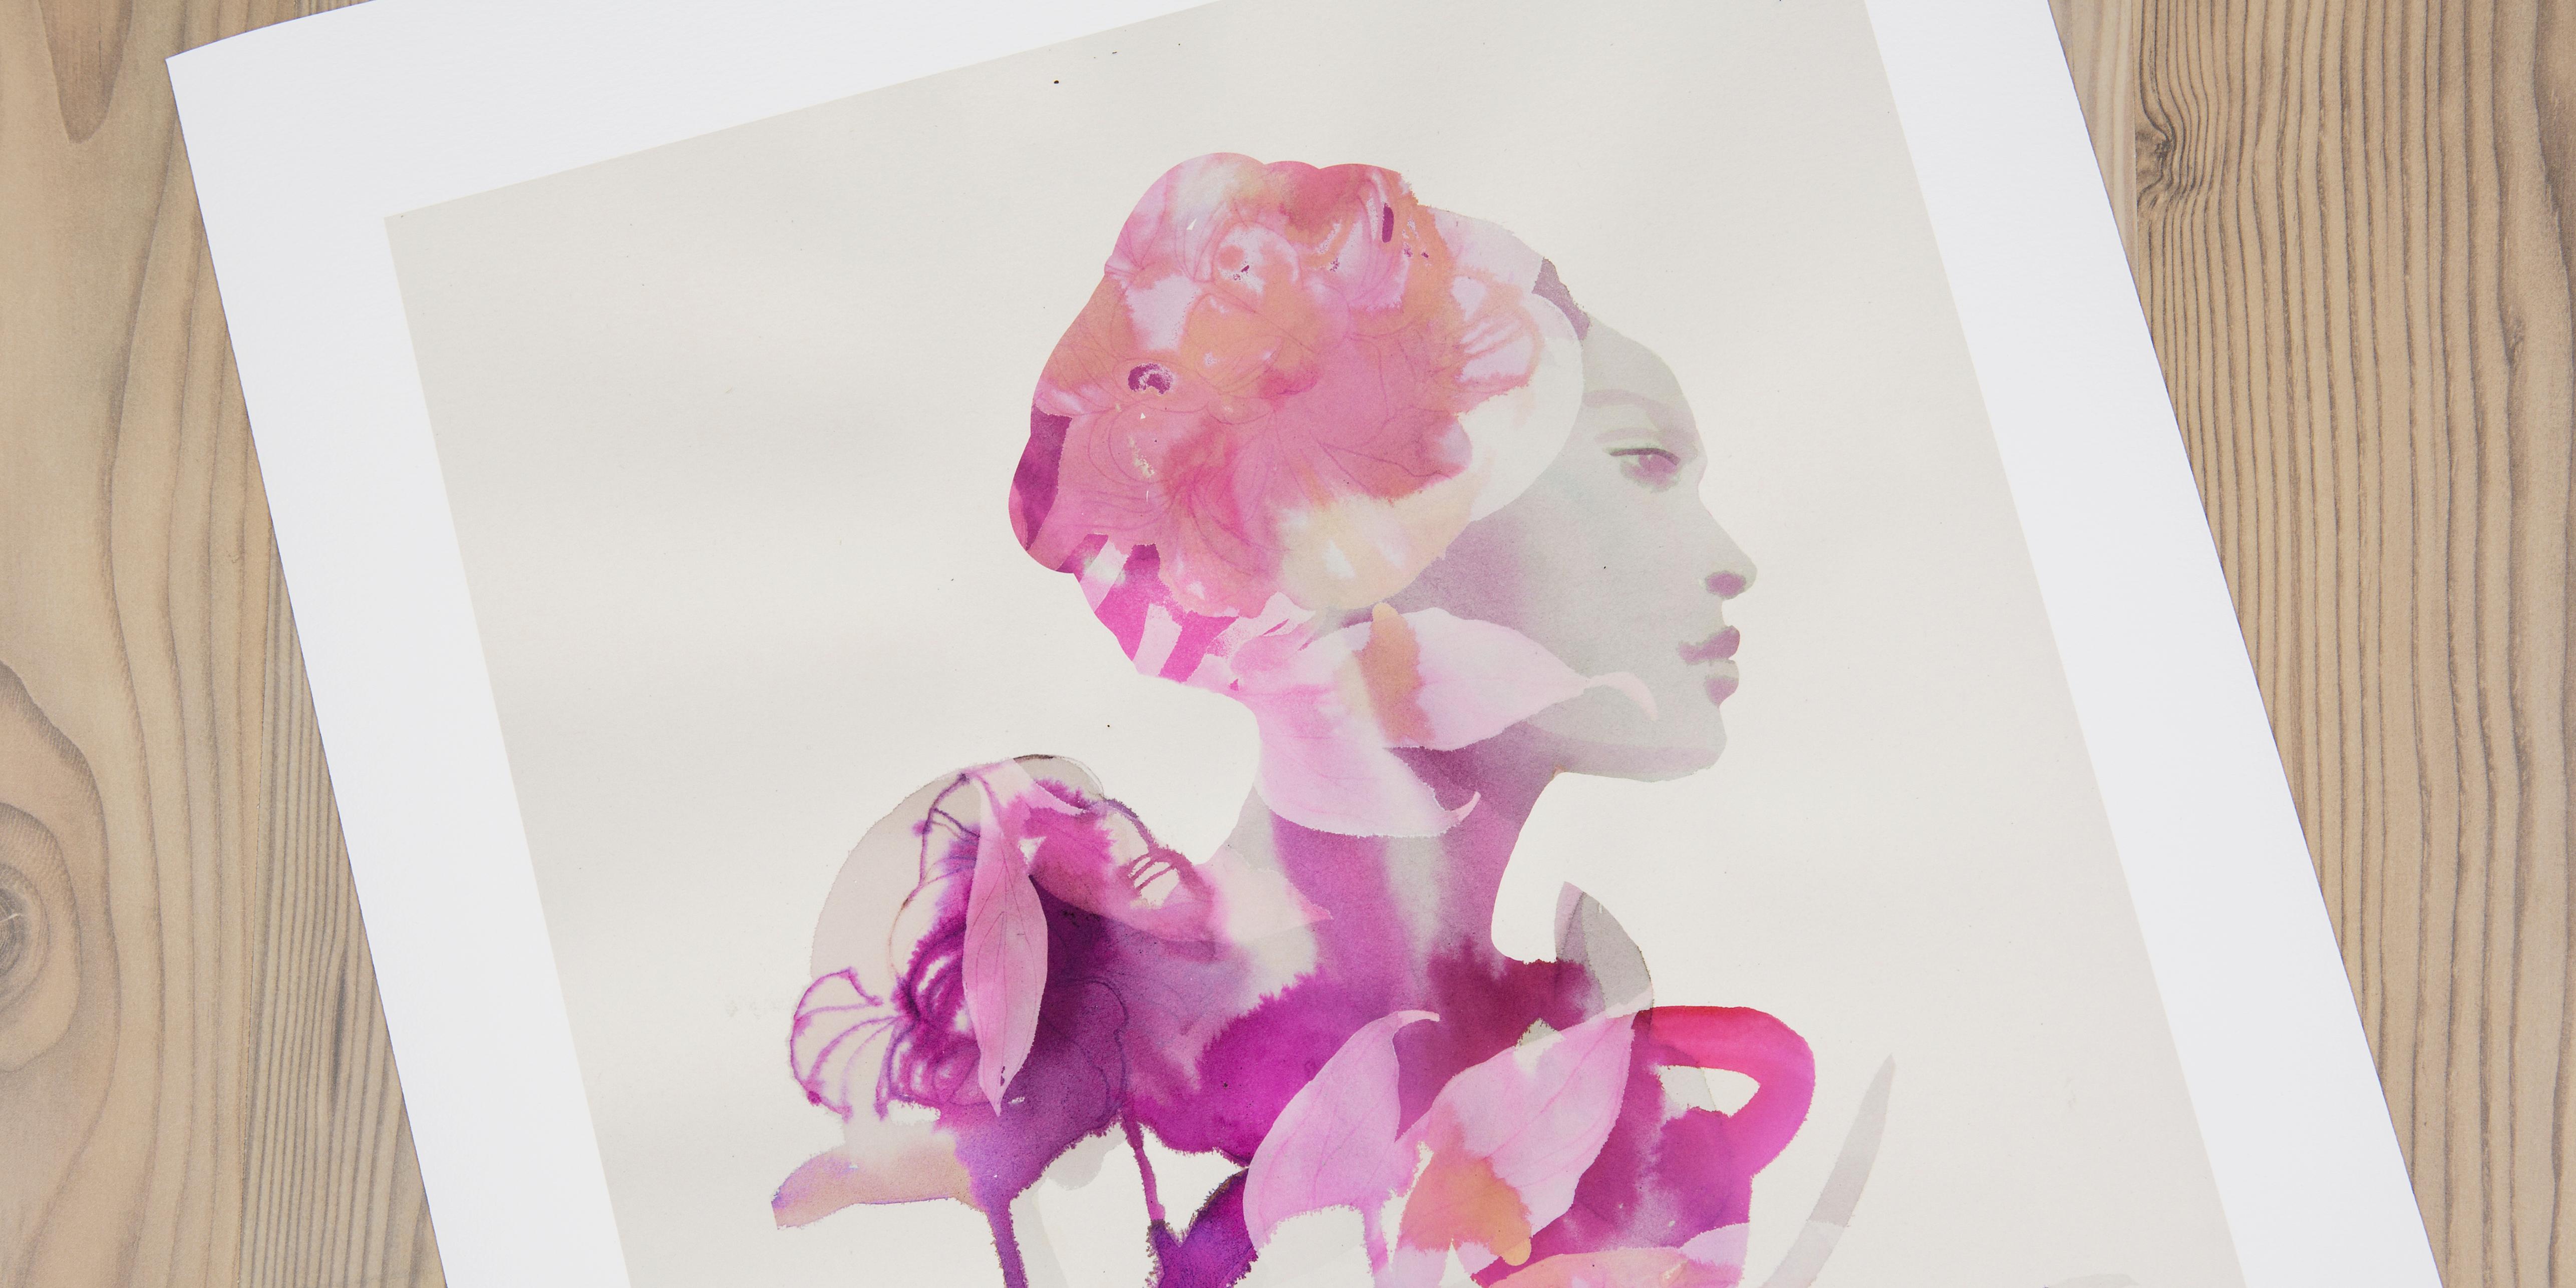 A magical take on fashion. A watercolor painting of a woman in thought beneath the flattering drapes of a purple floral design interpreted by a trusted art ally. 